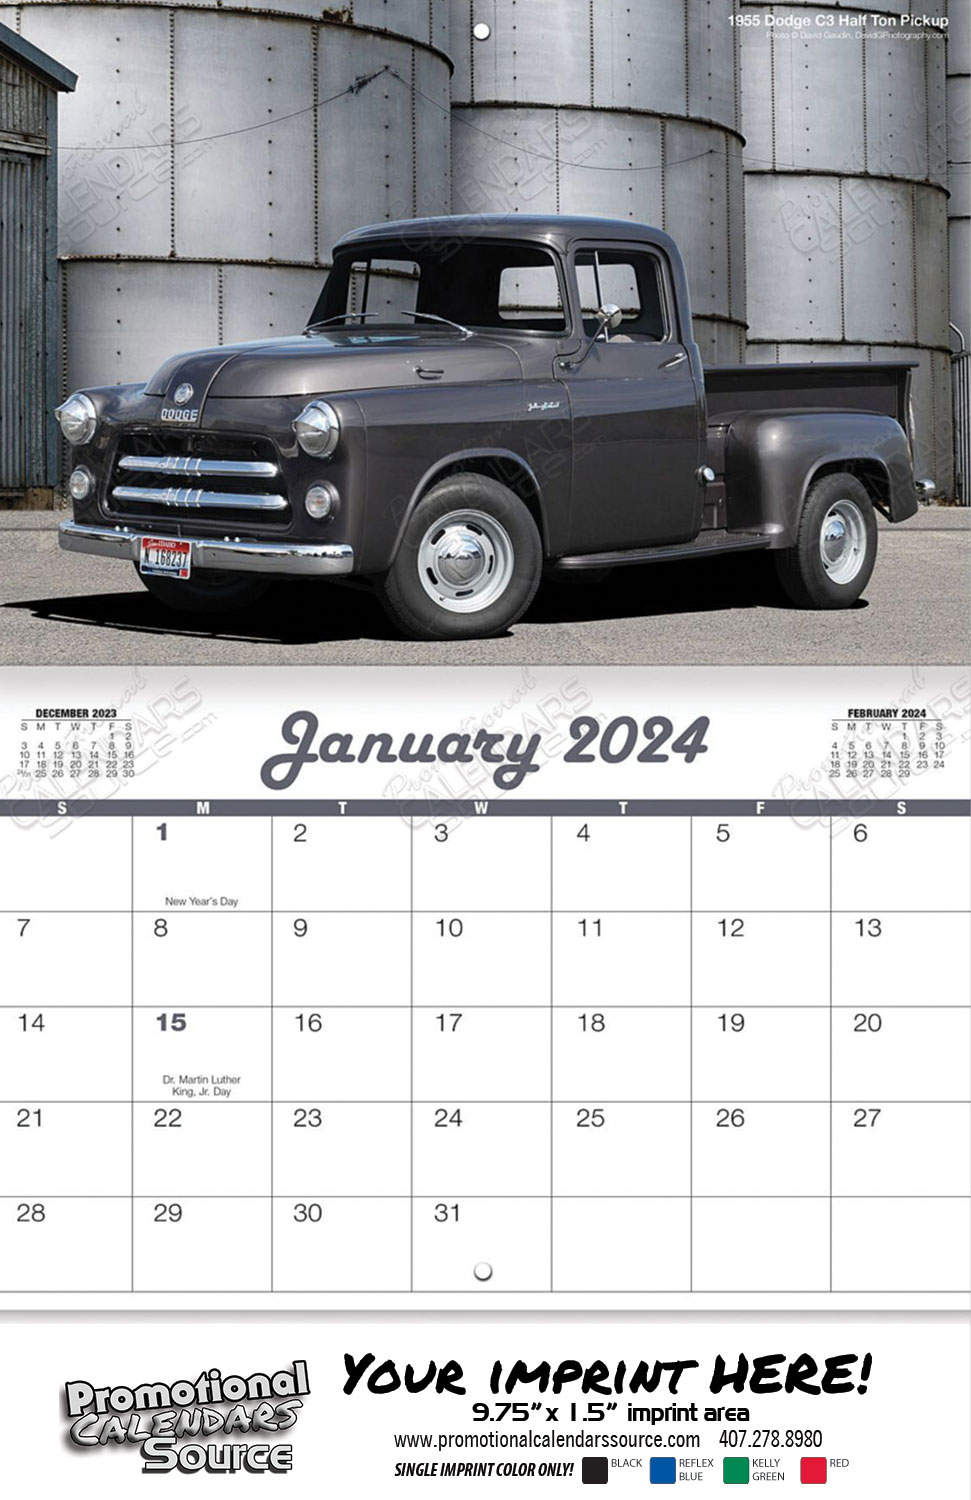 Classic Cars of Days Gone By Wall Calendar Stapled